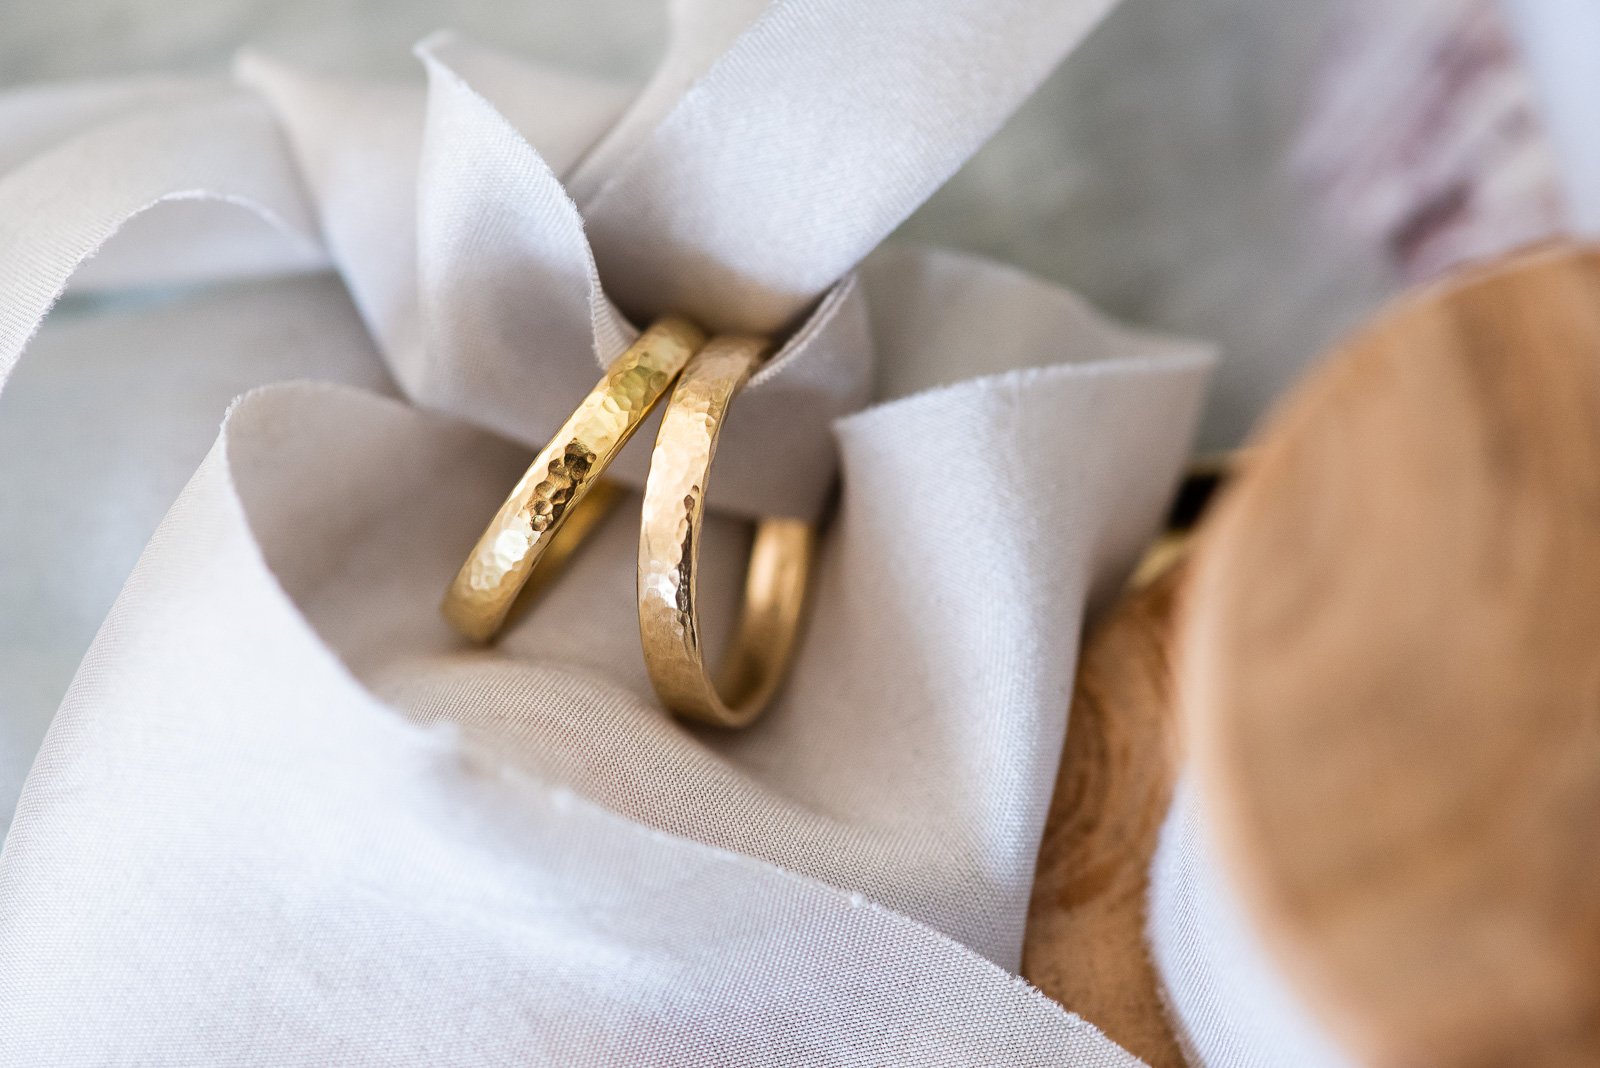  Two matching narrow, hammered gold wedding bands  Photo by: Fiona Kelly 